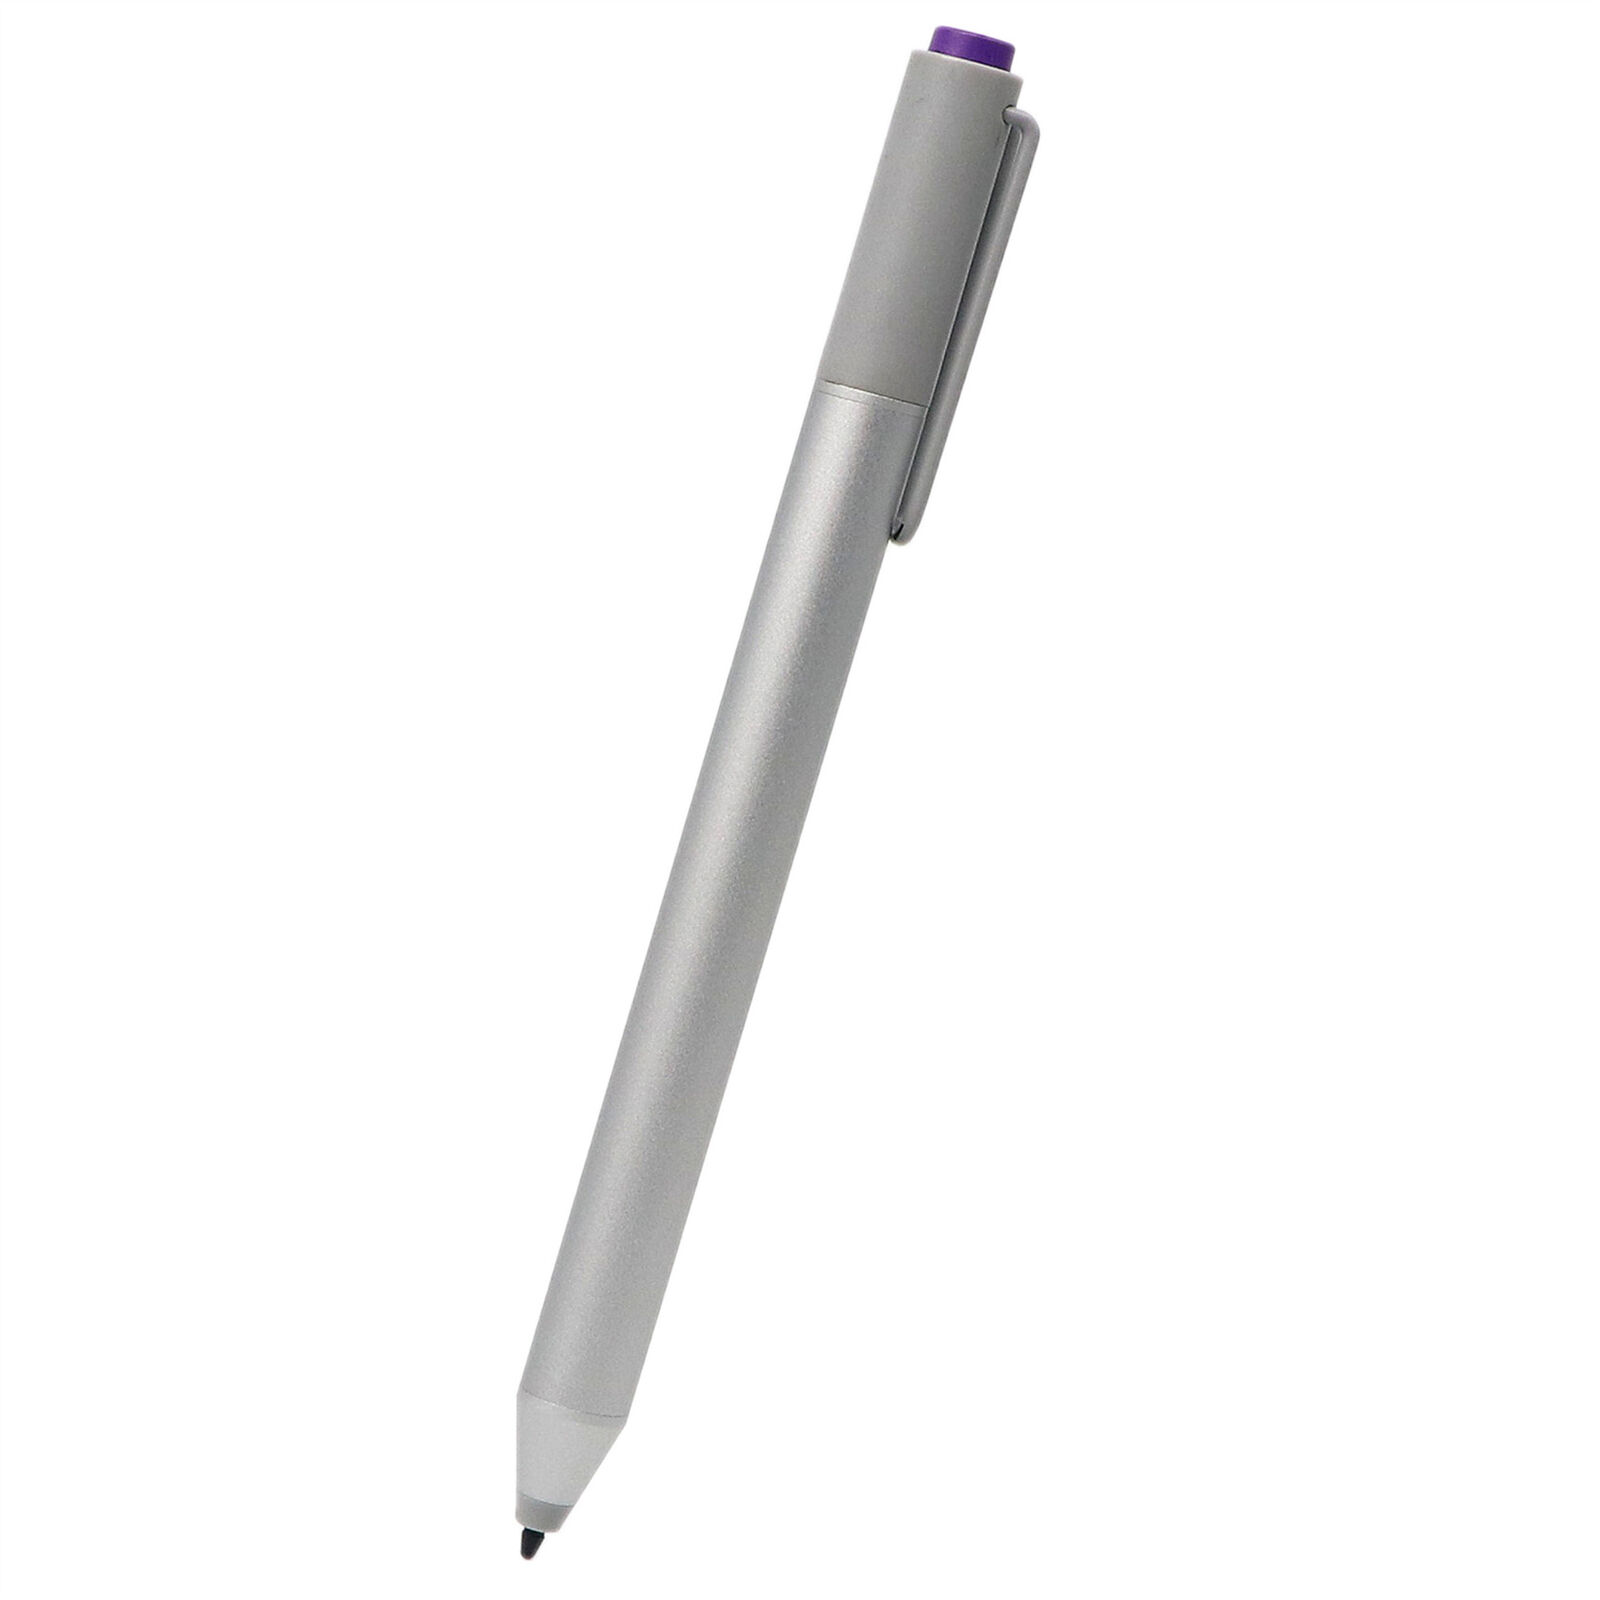 Microsoft Surface Pen for Surface Pro 3, Surface Pro 4, Surface 3 (Silver)